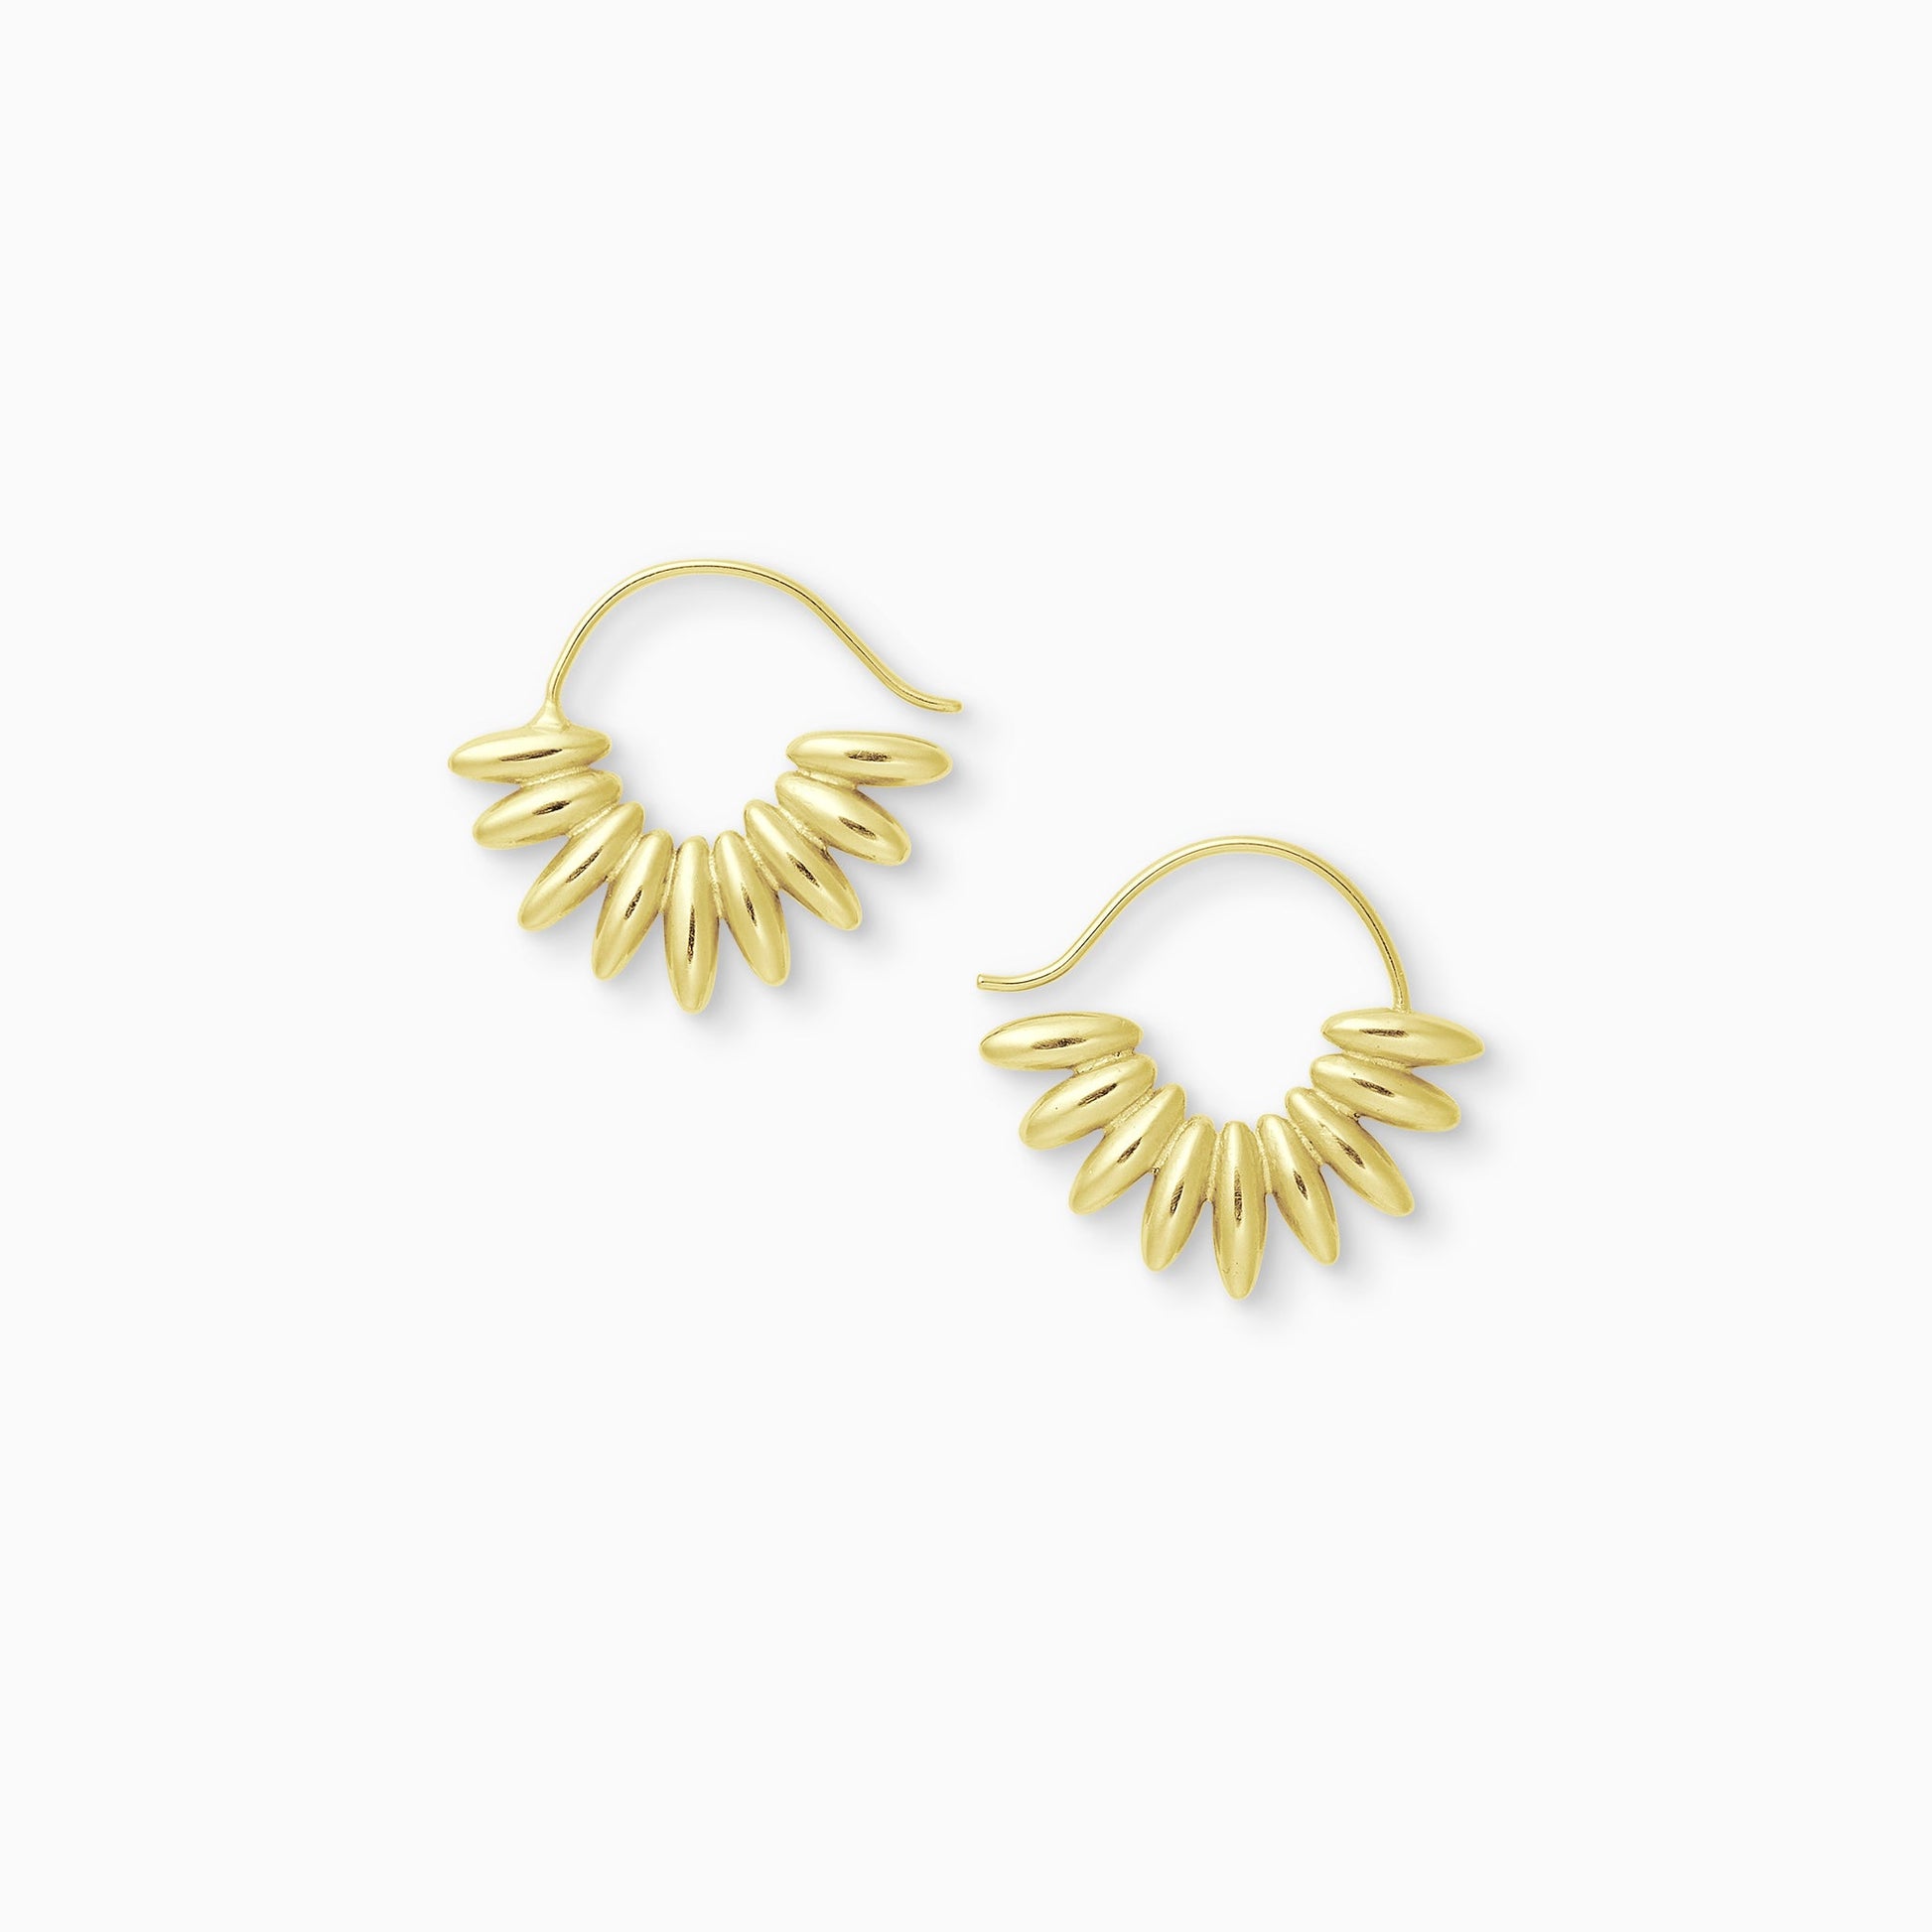 A pair of shiny 18ct Fairtrade yellow gold round hoop earrings. 9 tapering cylindrical form the bottom half of the hoop hoop with the curved ear wire competing the circle. 25mm width 21mm length